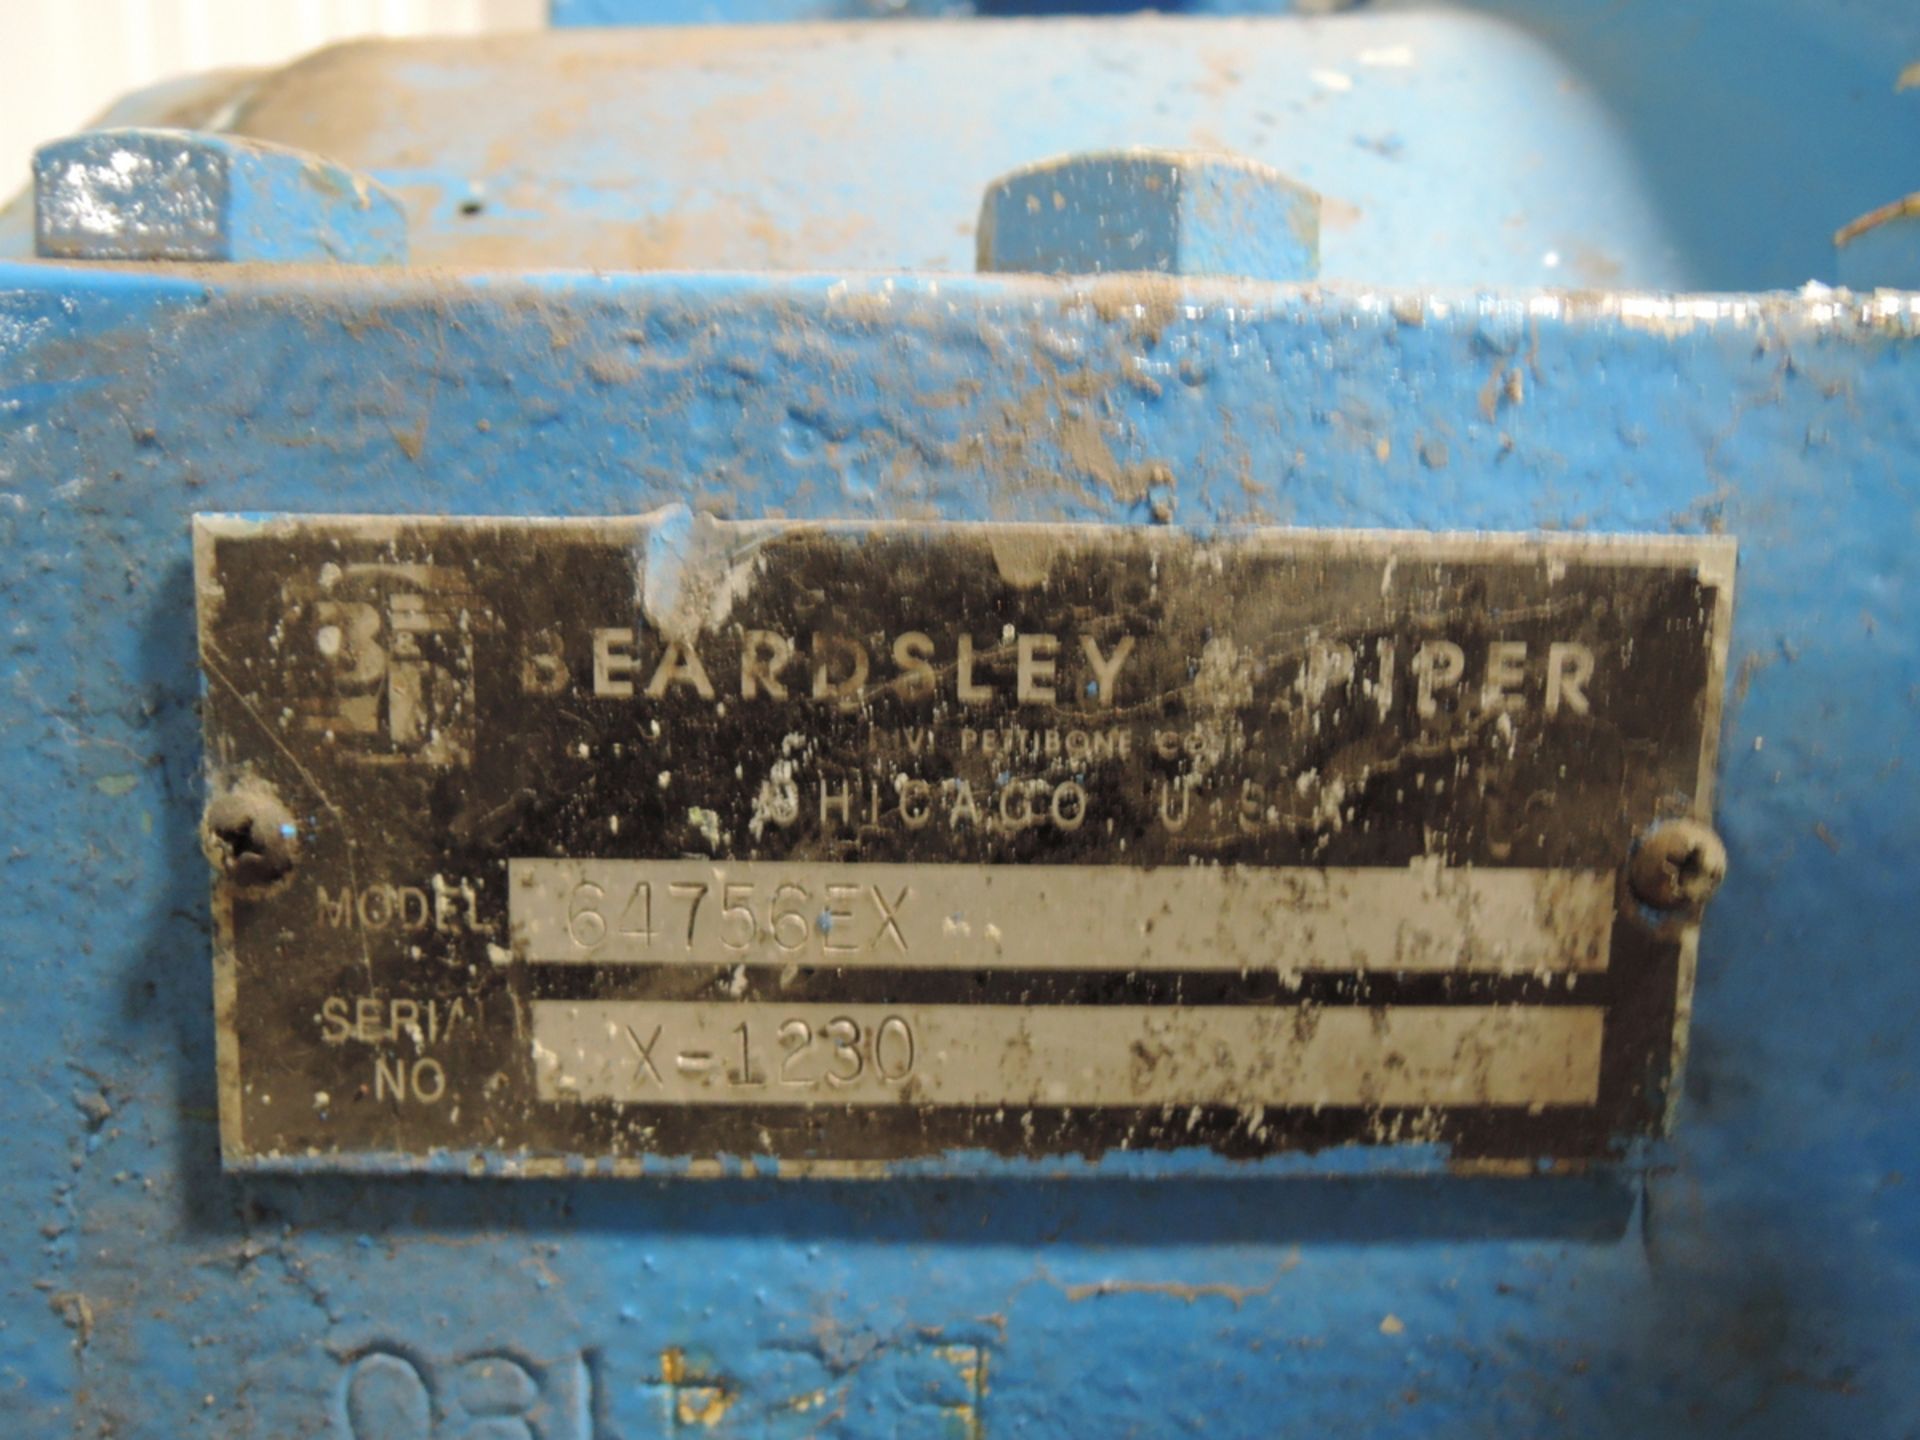 B&P MODEL 64756EX 100B GEAR BOX S/N: X- 1230 FOR 200 HP VIDEO OF GEARS AVAILABLE - Image 3 of 3